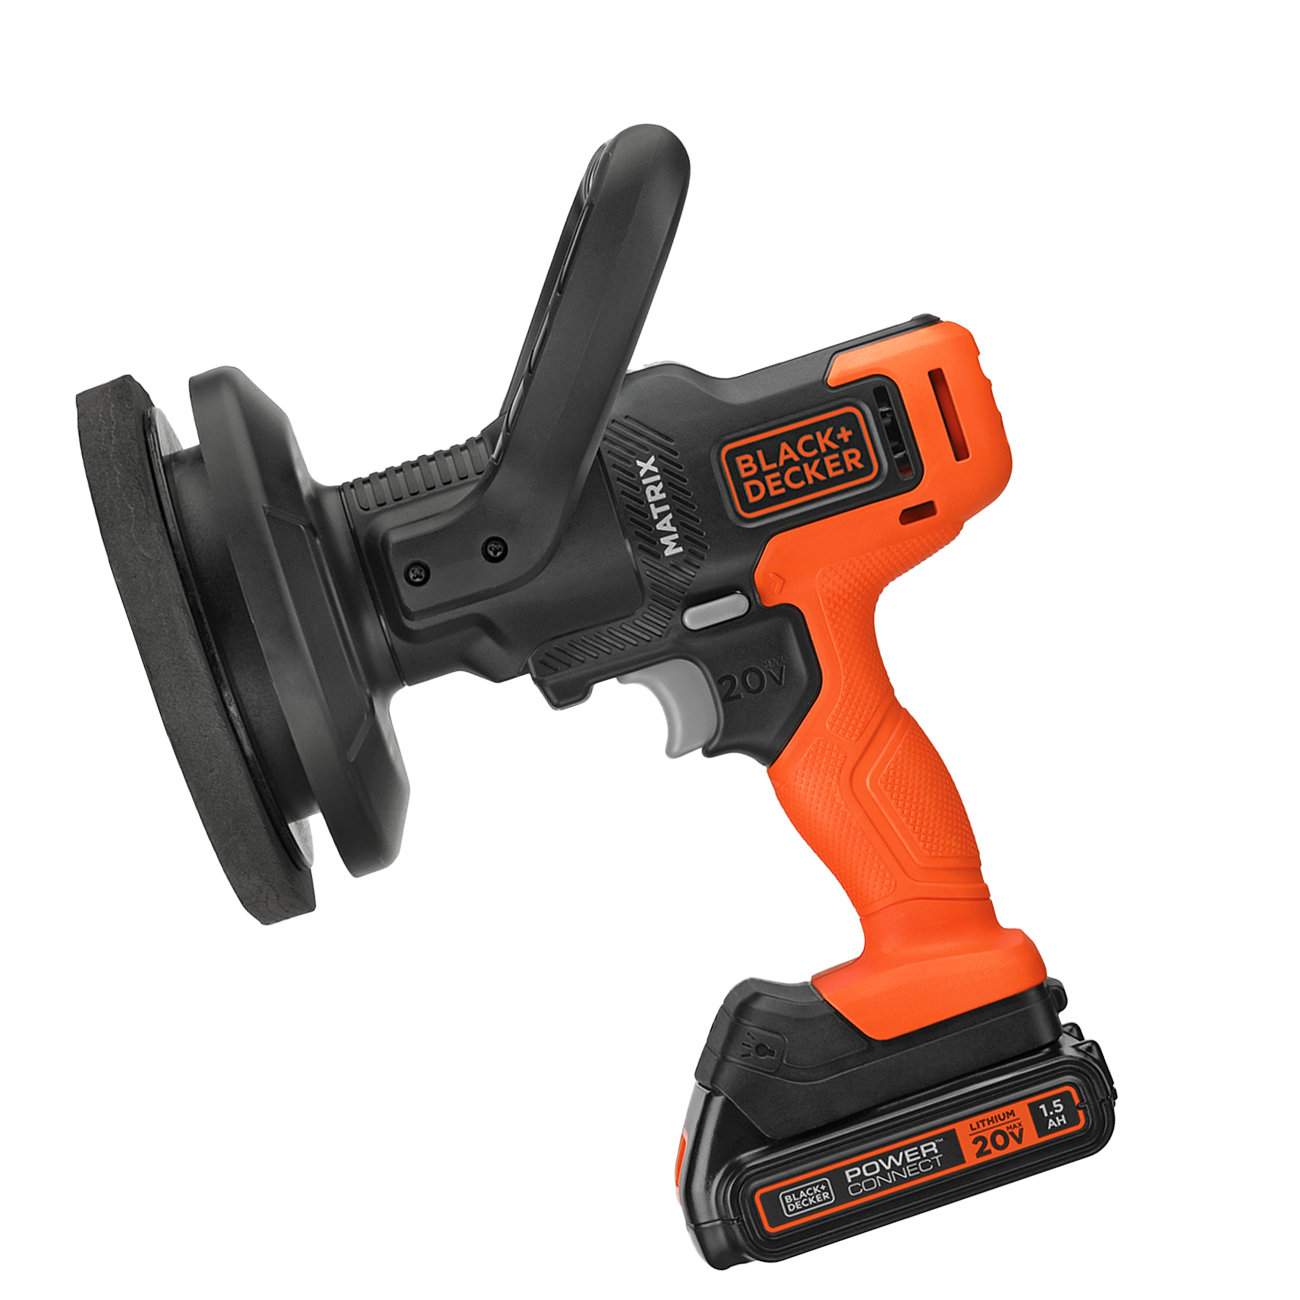 BLACK+DECKER Matrix™ 20V MAX* Buffer Kit with Battery and Charger Included